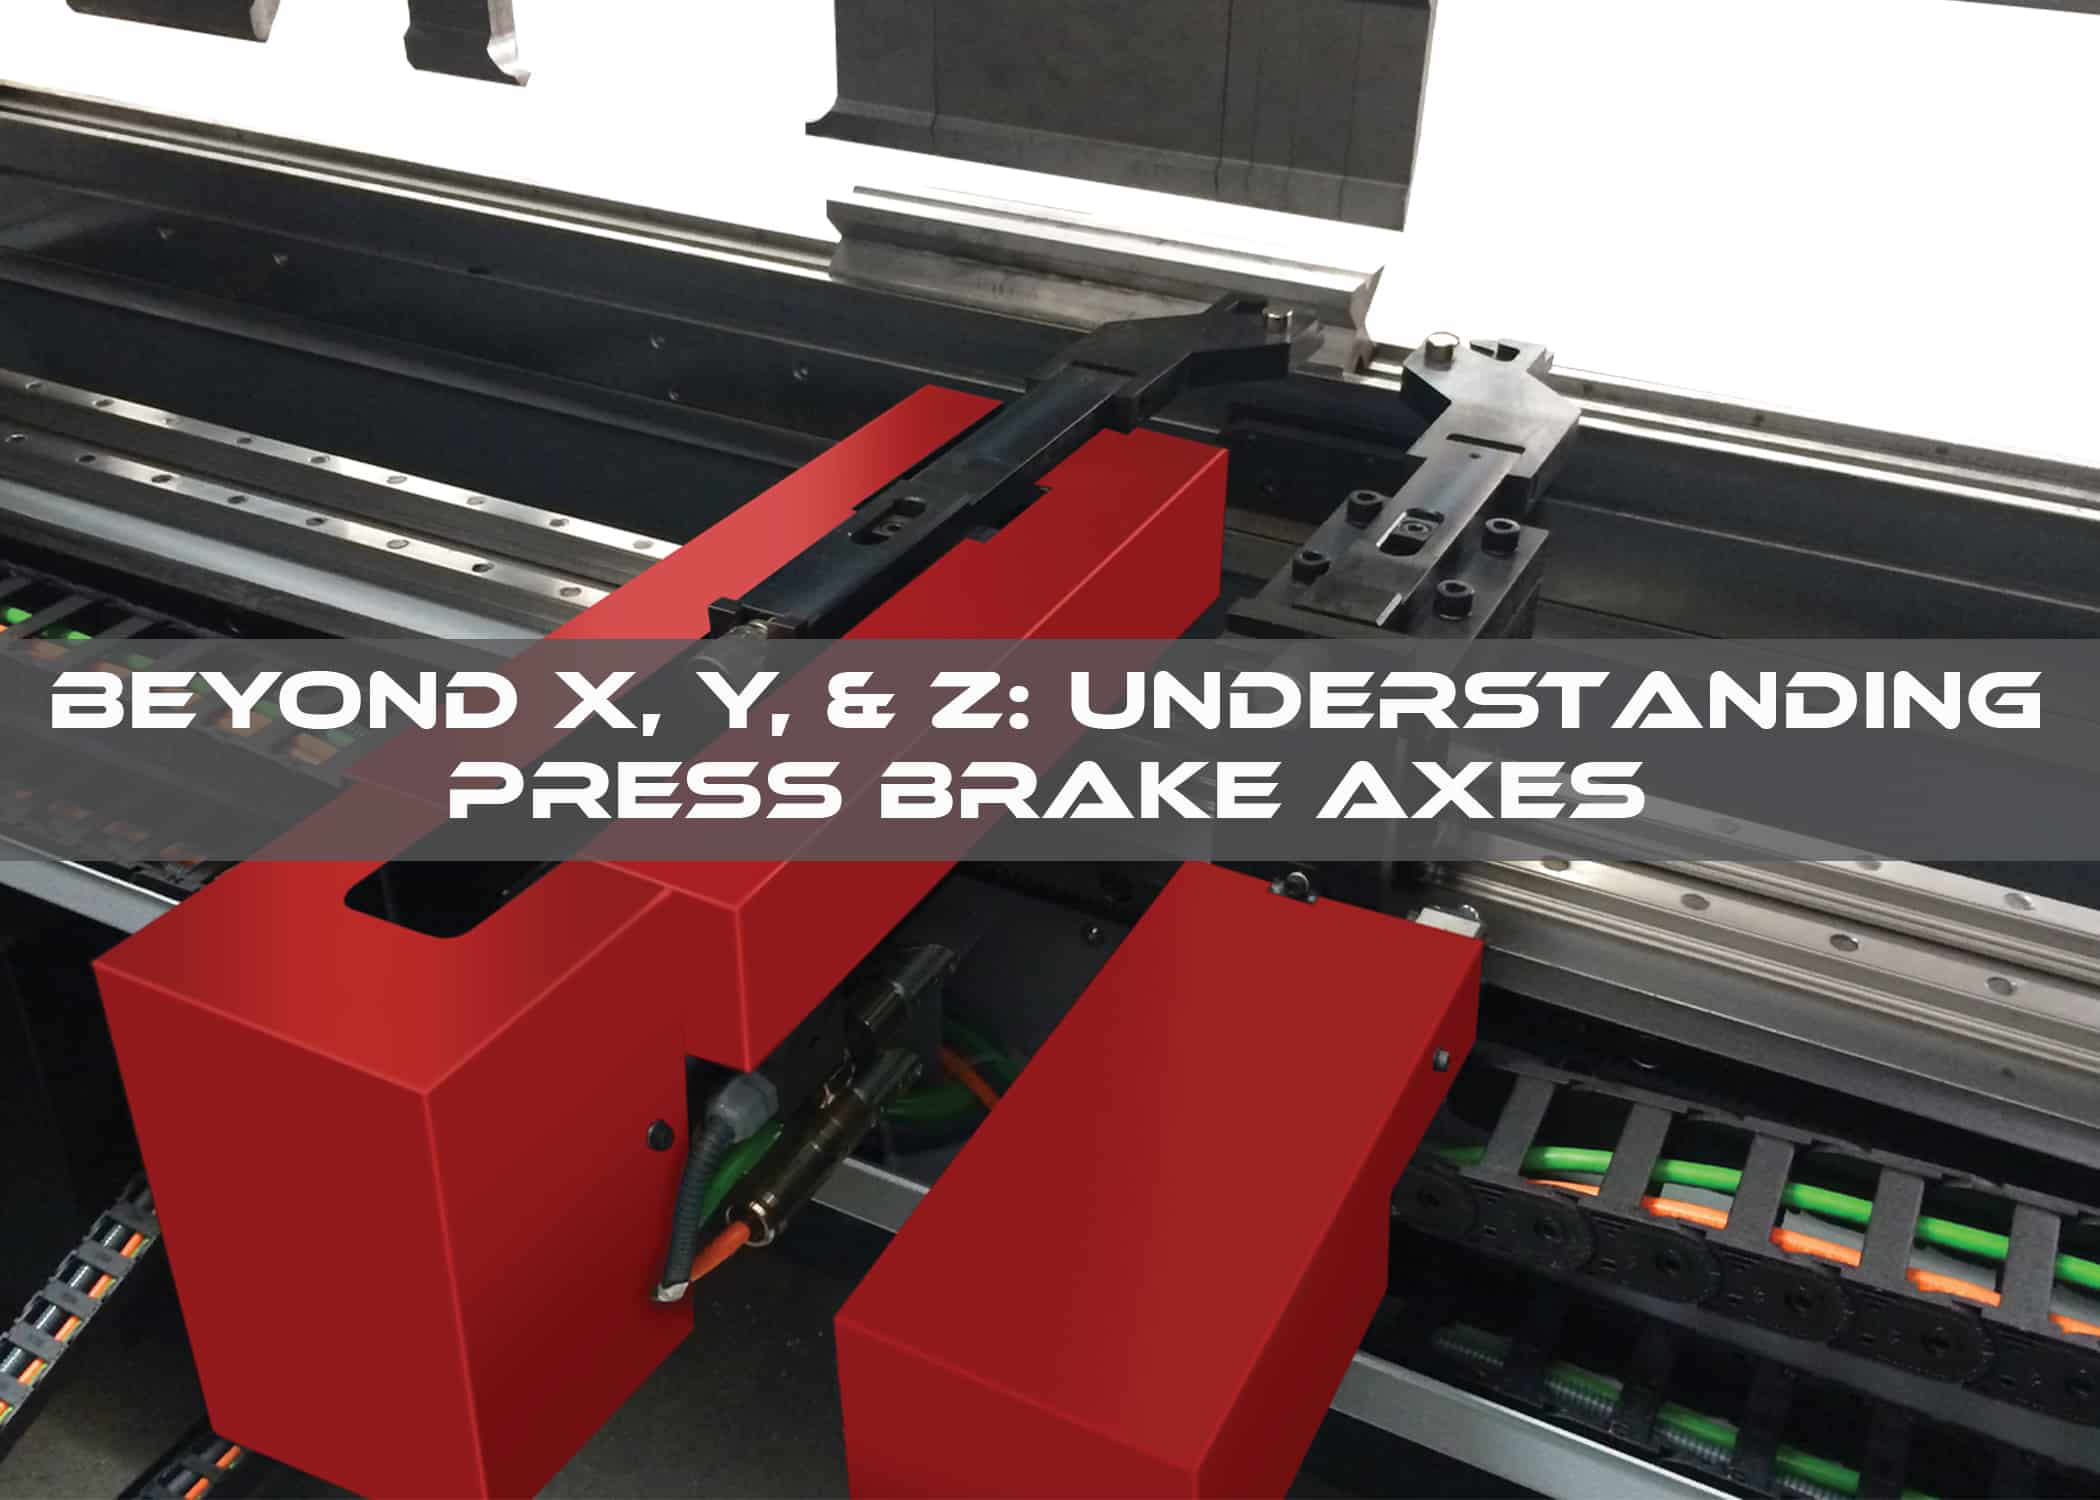 Beyond X, Y, and Z Understanding Press Brake Axes